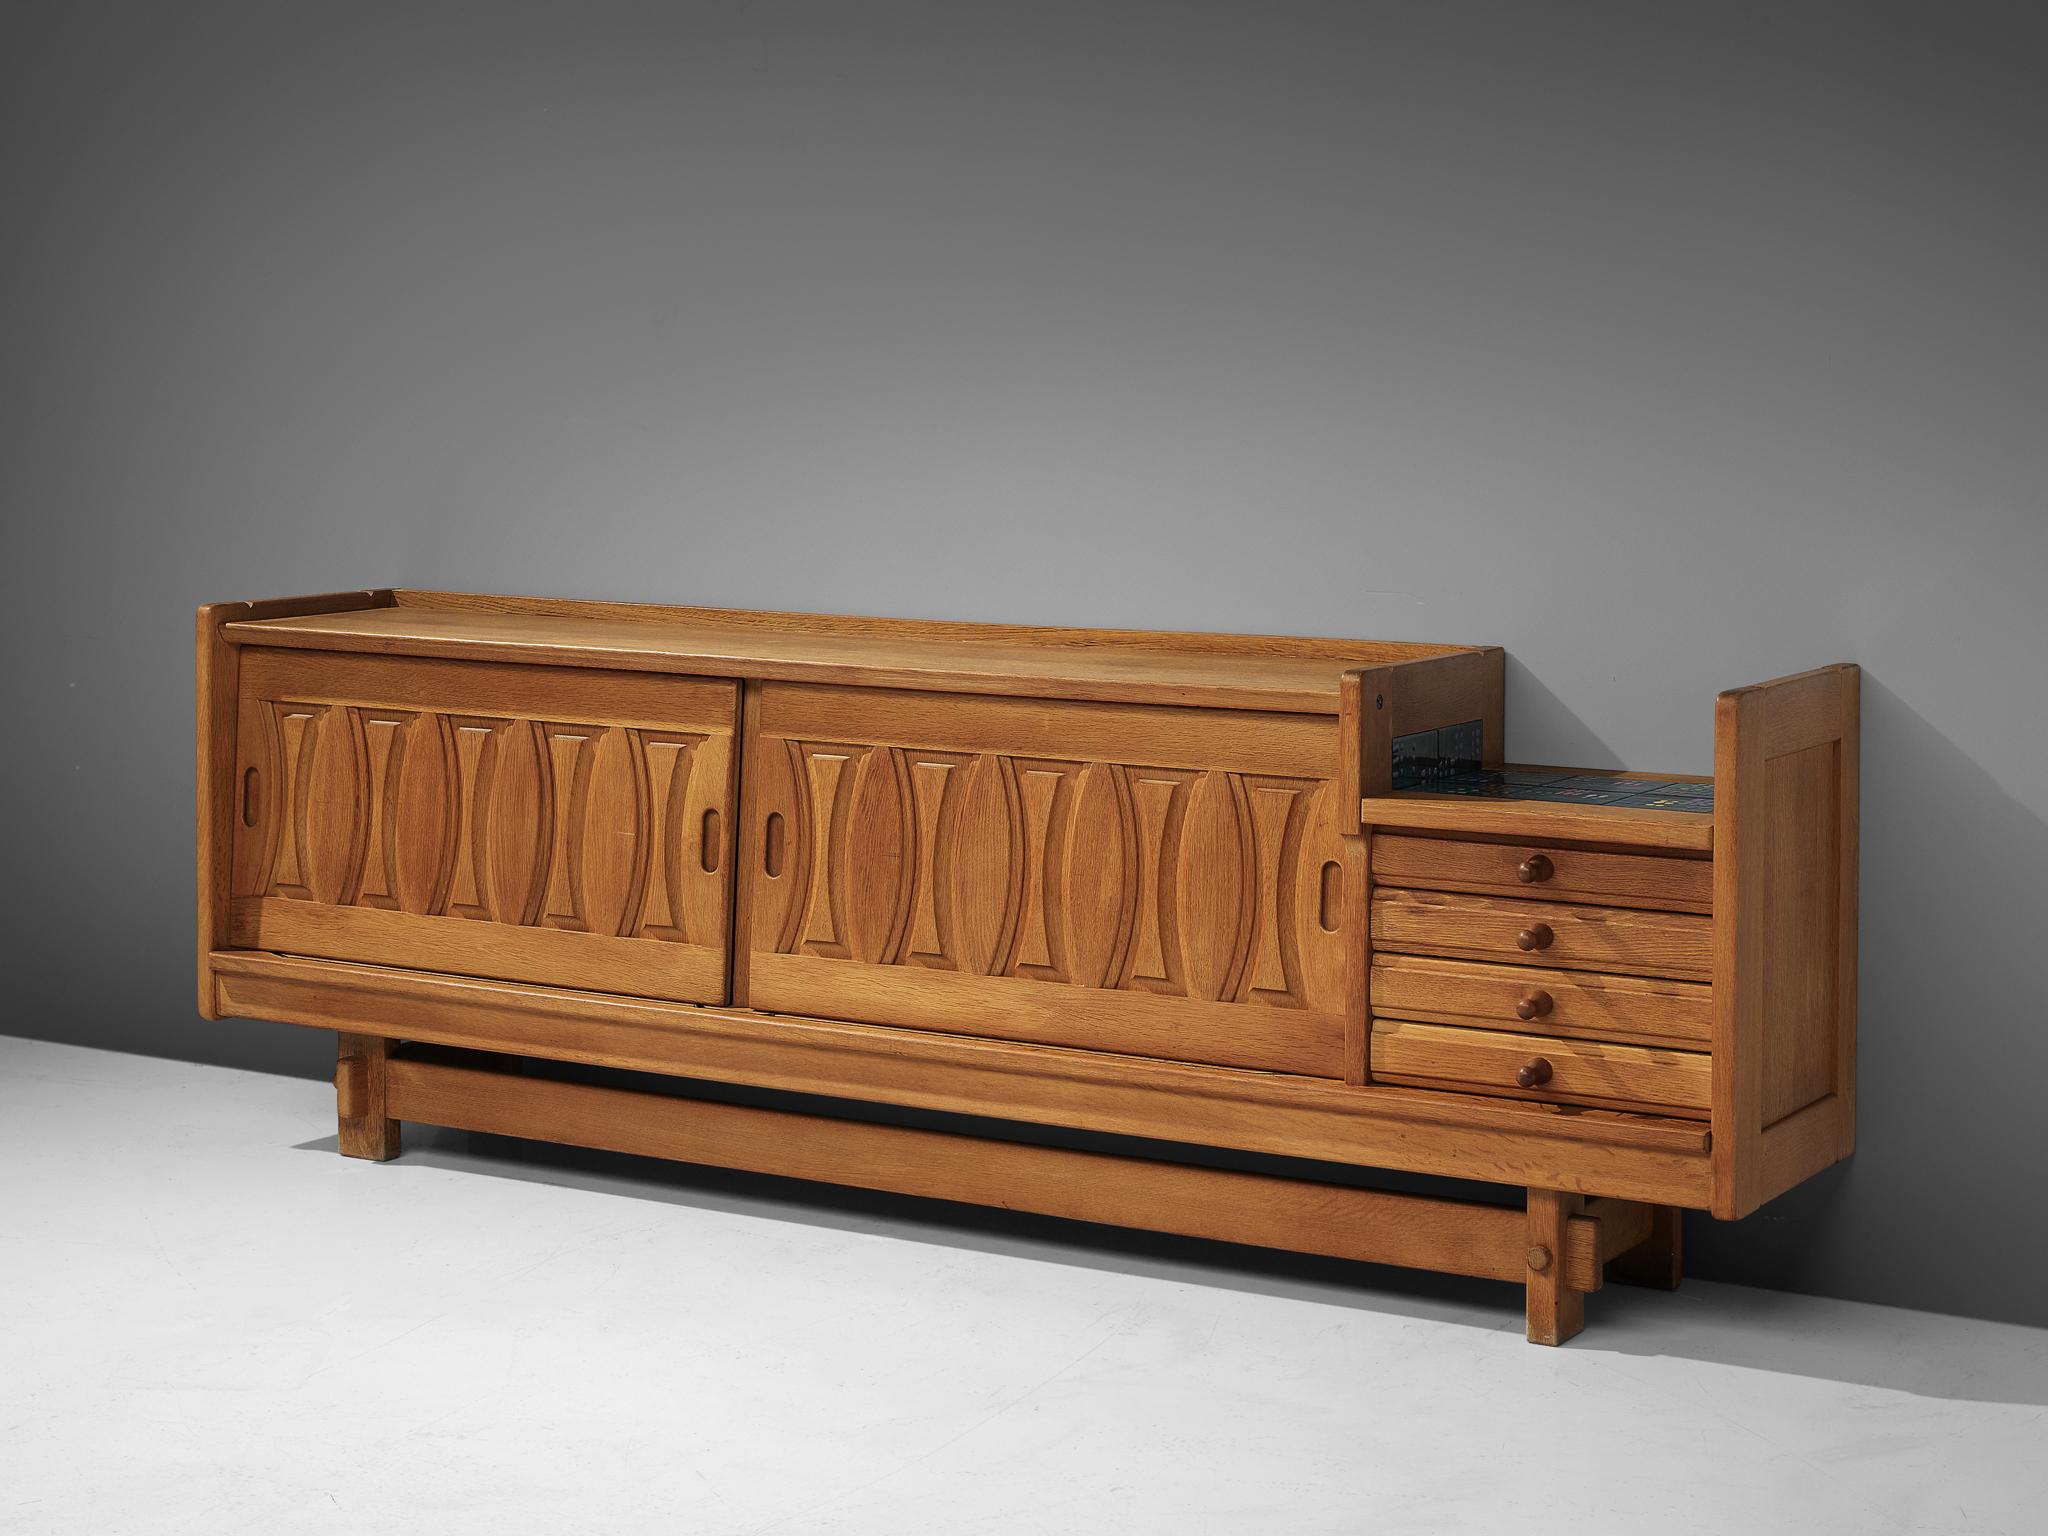 Guillerme et Chambron, sideboard, oak and ceramic, France, 1960s.

Credenza in oak by French designers Guillerme & Chambron. This sideboard is equipped with two sliding-doors and a set of drawers. The front of the sideboard is beautifully detailed